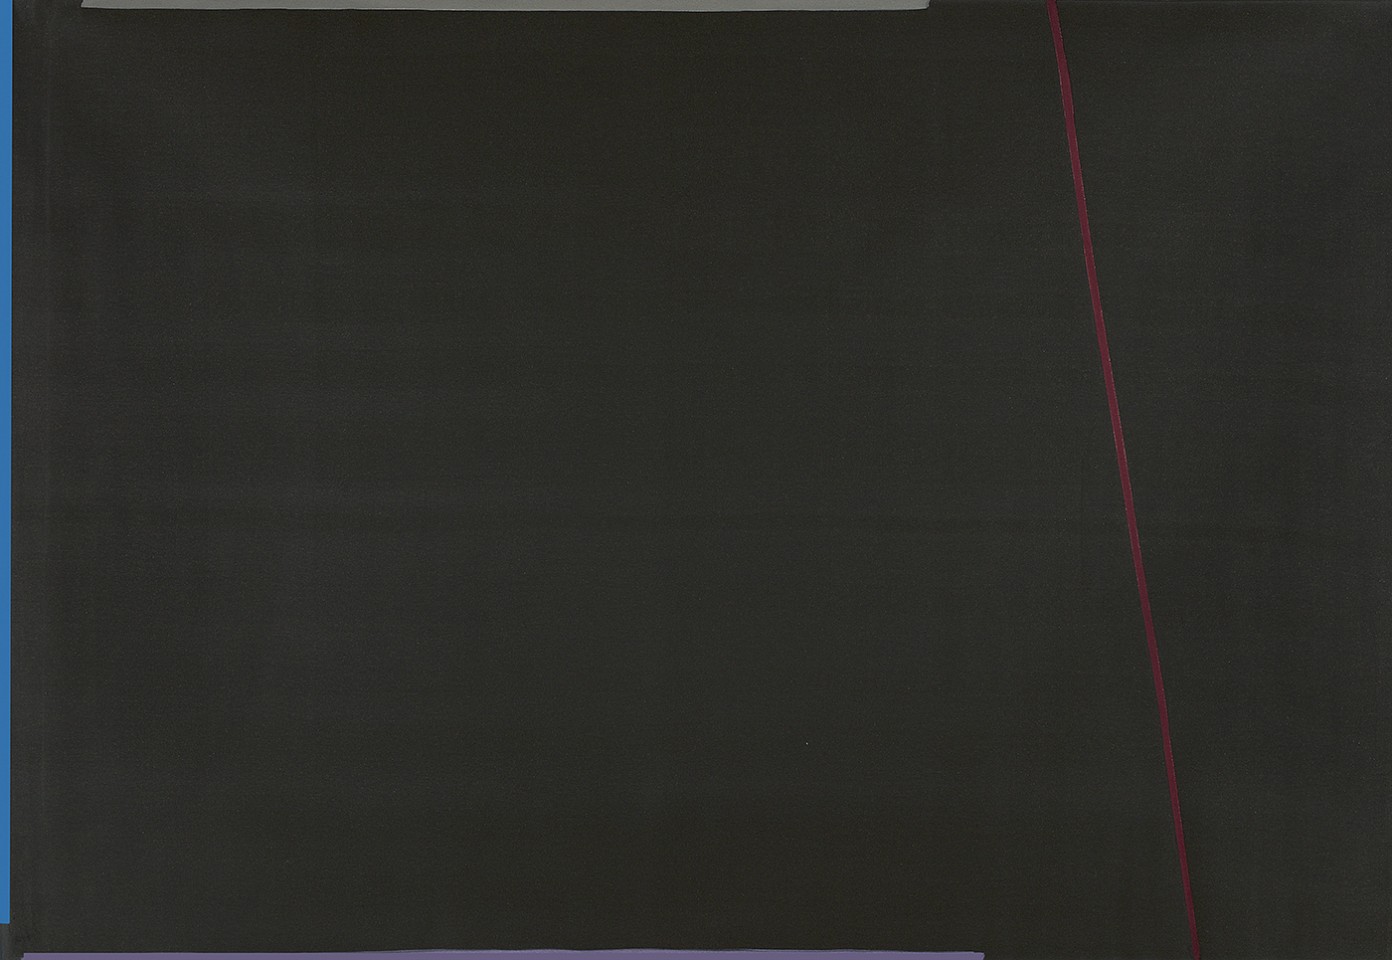 Larry Zox, Untitled, c. 1973
Acrylic on canvas, 78 x 114 in. (198.1 x 289.6 cm)
ZOX-00054